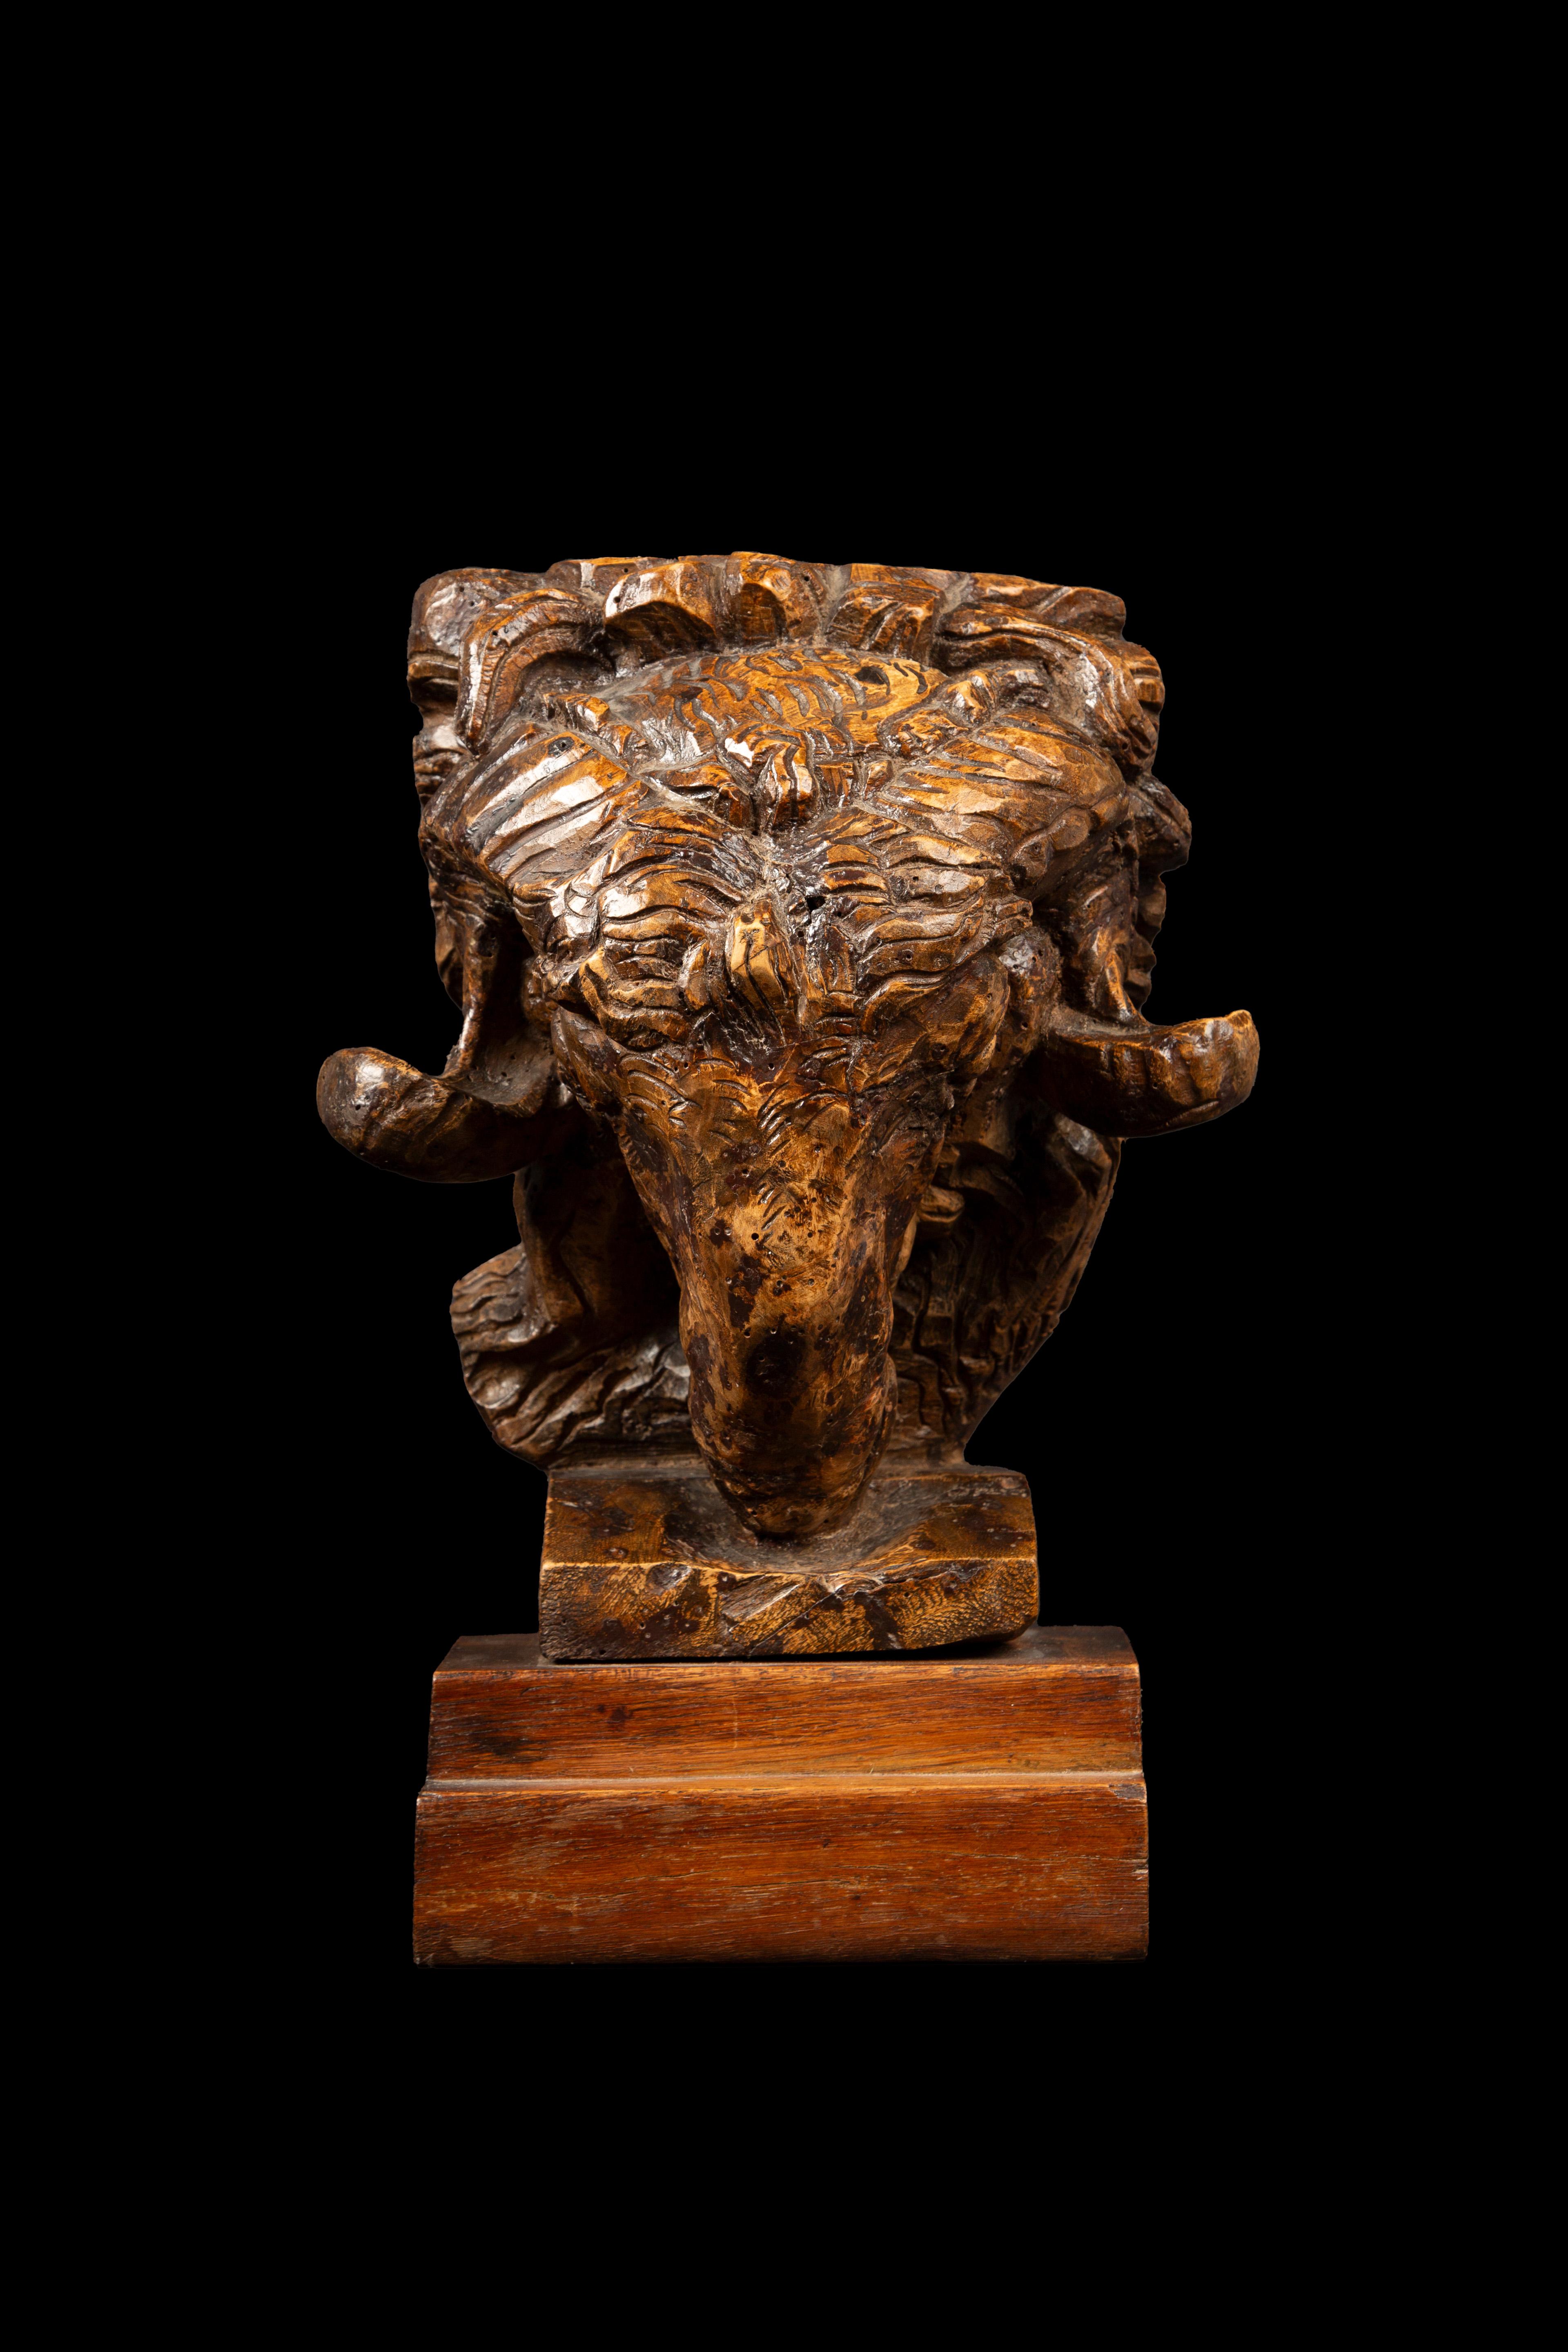 This stunning burl wood sculpture of a ram's head, crafted by renowned Swiss sculptor Edwin Bucher, showcases the artist's mastery of form and texture. Born in Lucerne, Switzerland, on March 14, 1879, Bucher initially studied art and craftsmanship